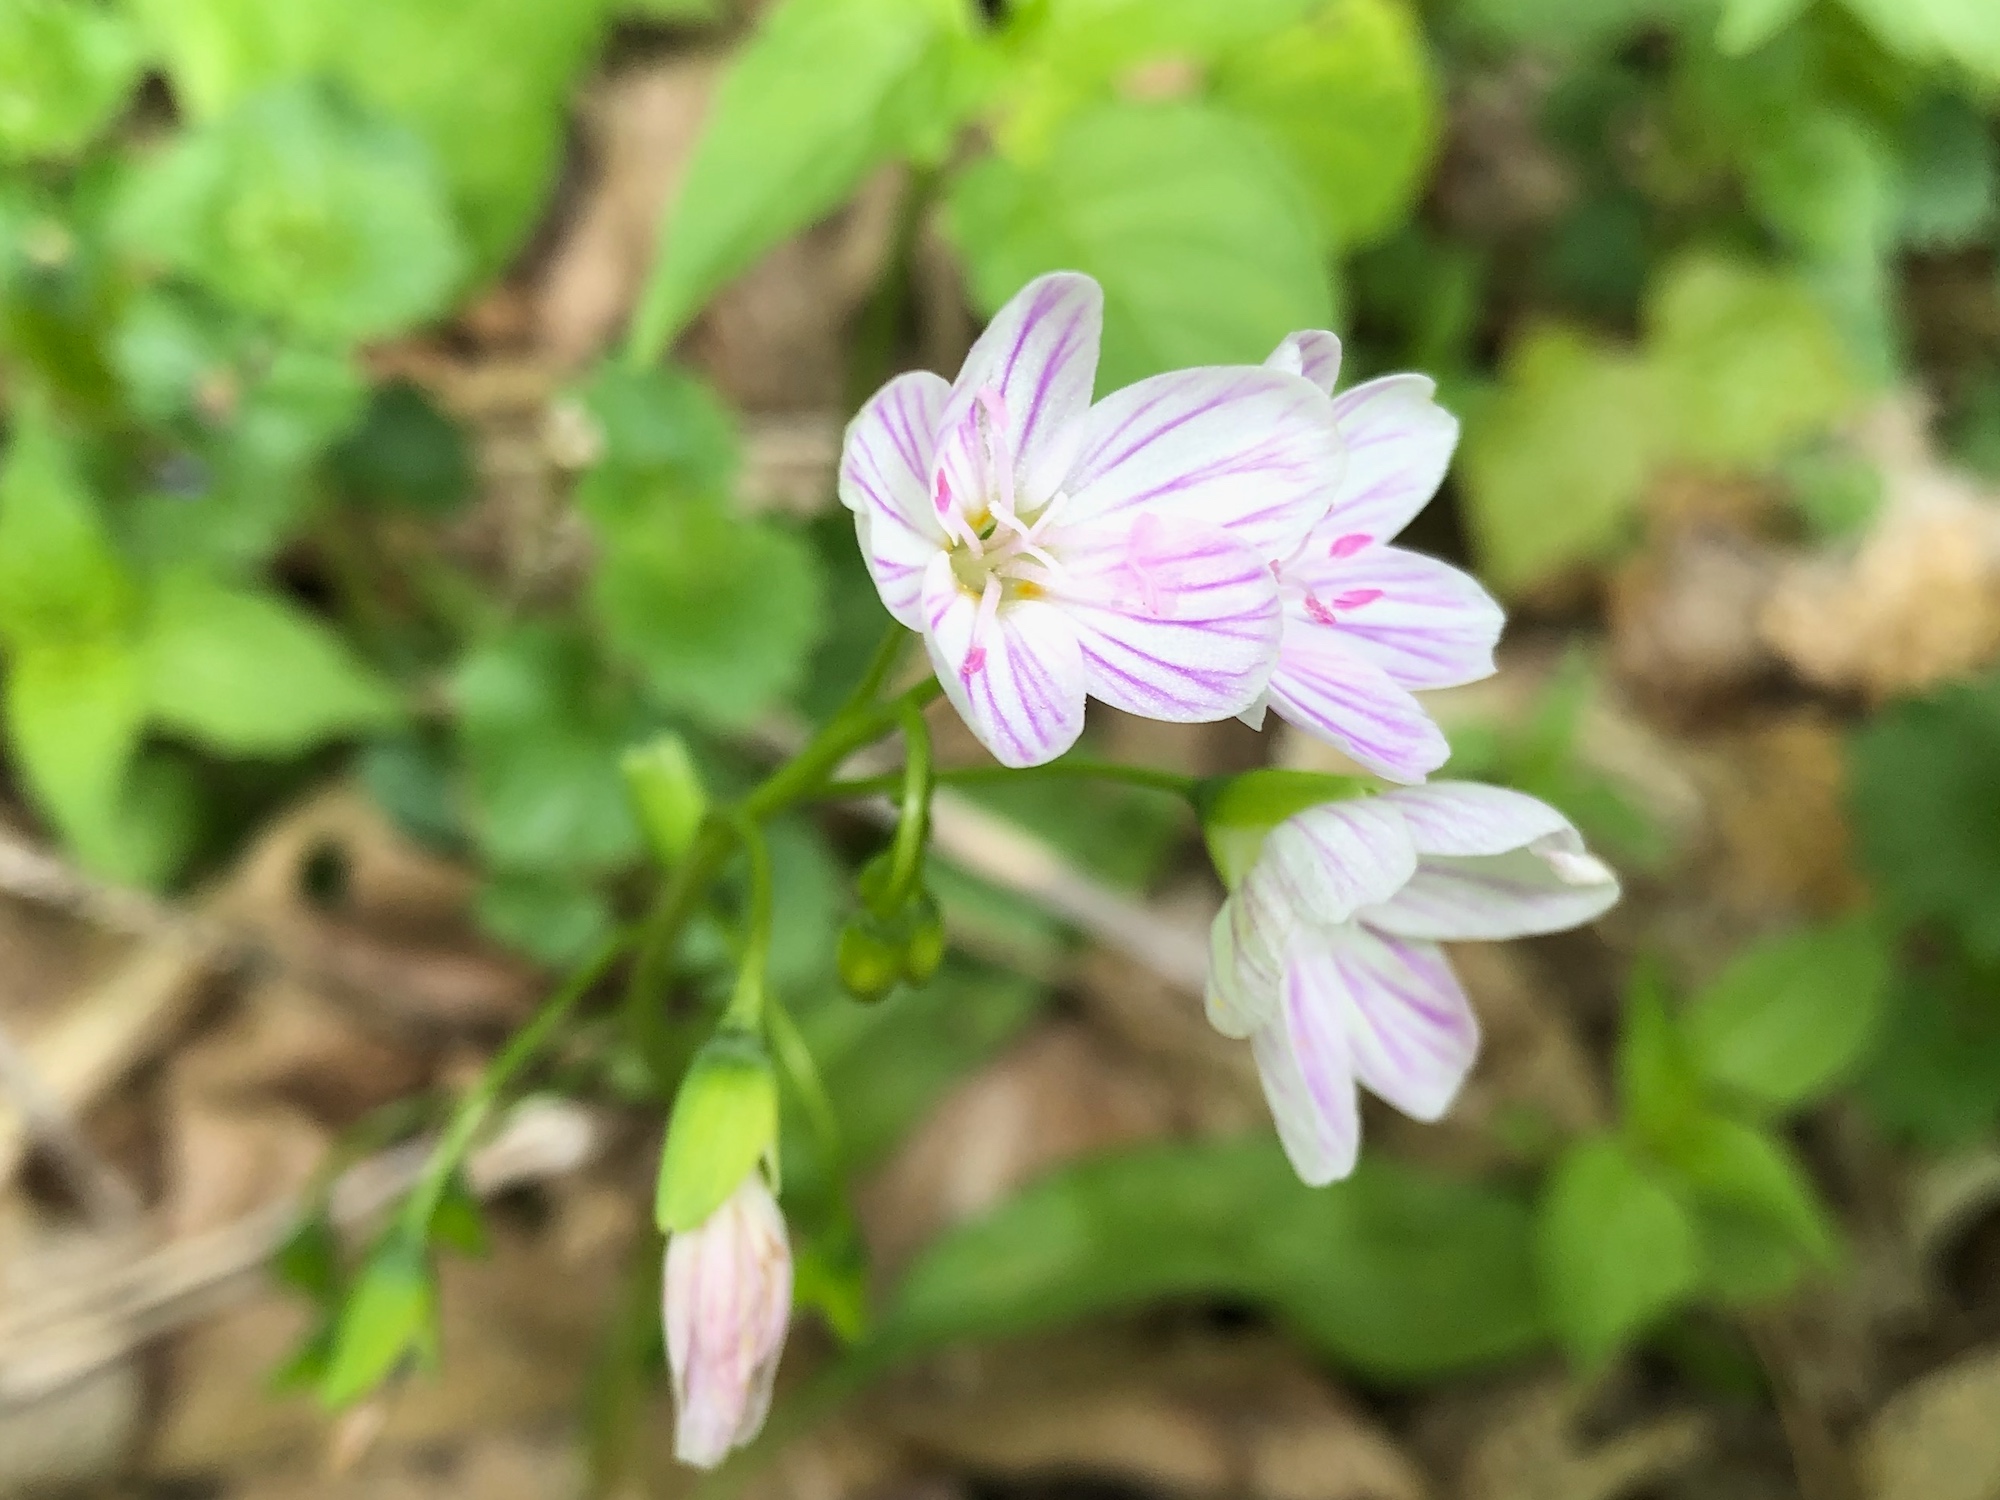 Springbeauty in the Maple-Basswood Forest of the University of Wisconsin Arboretum in Madison, Wisconsin on May 21, 2020.